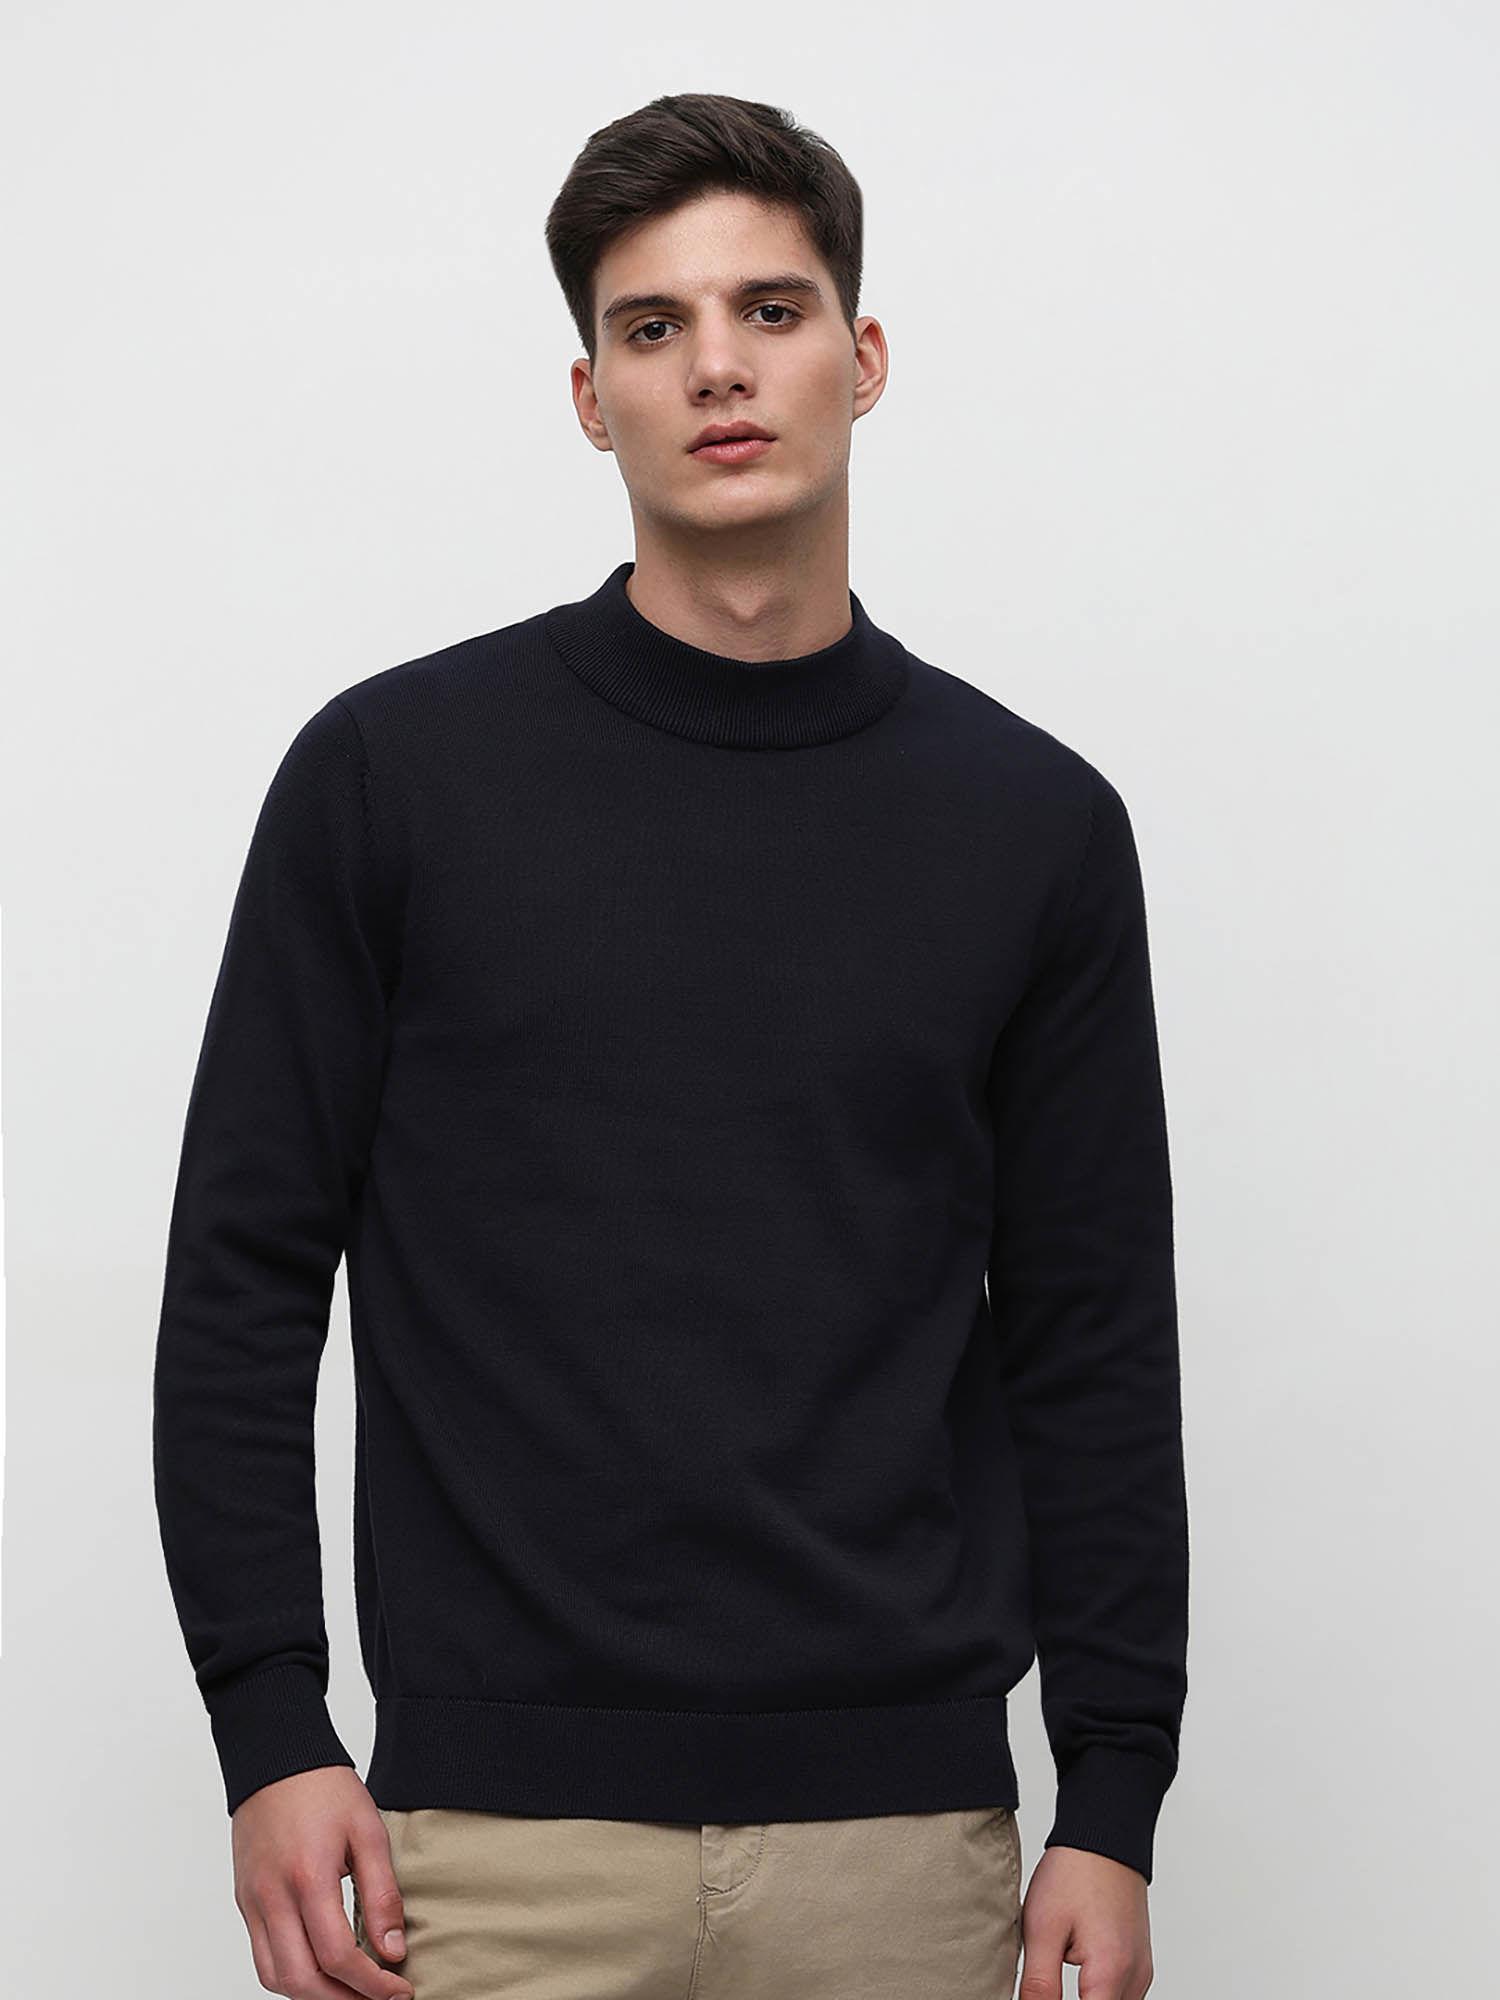 navy-blue-knitted-pullover